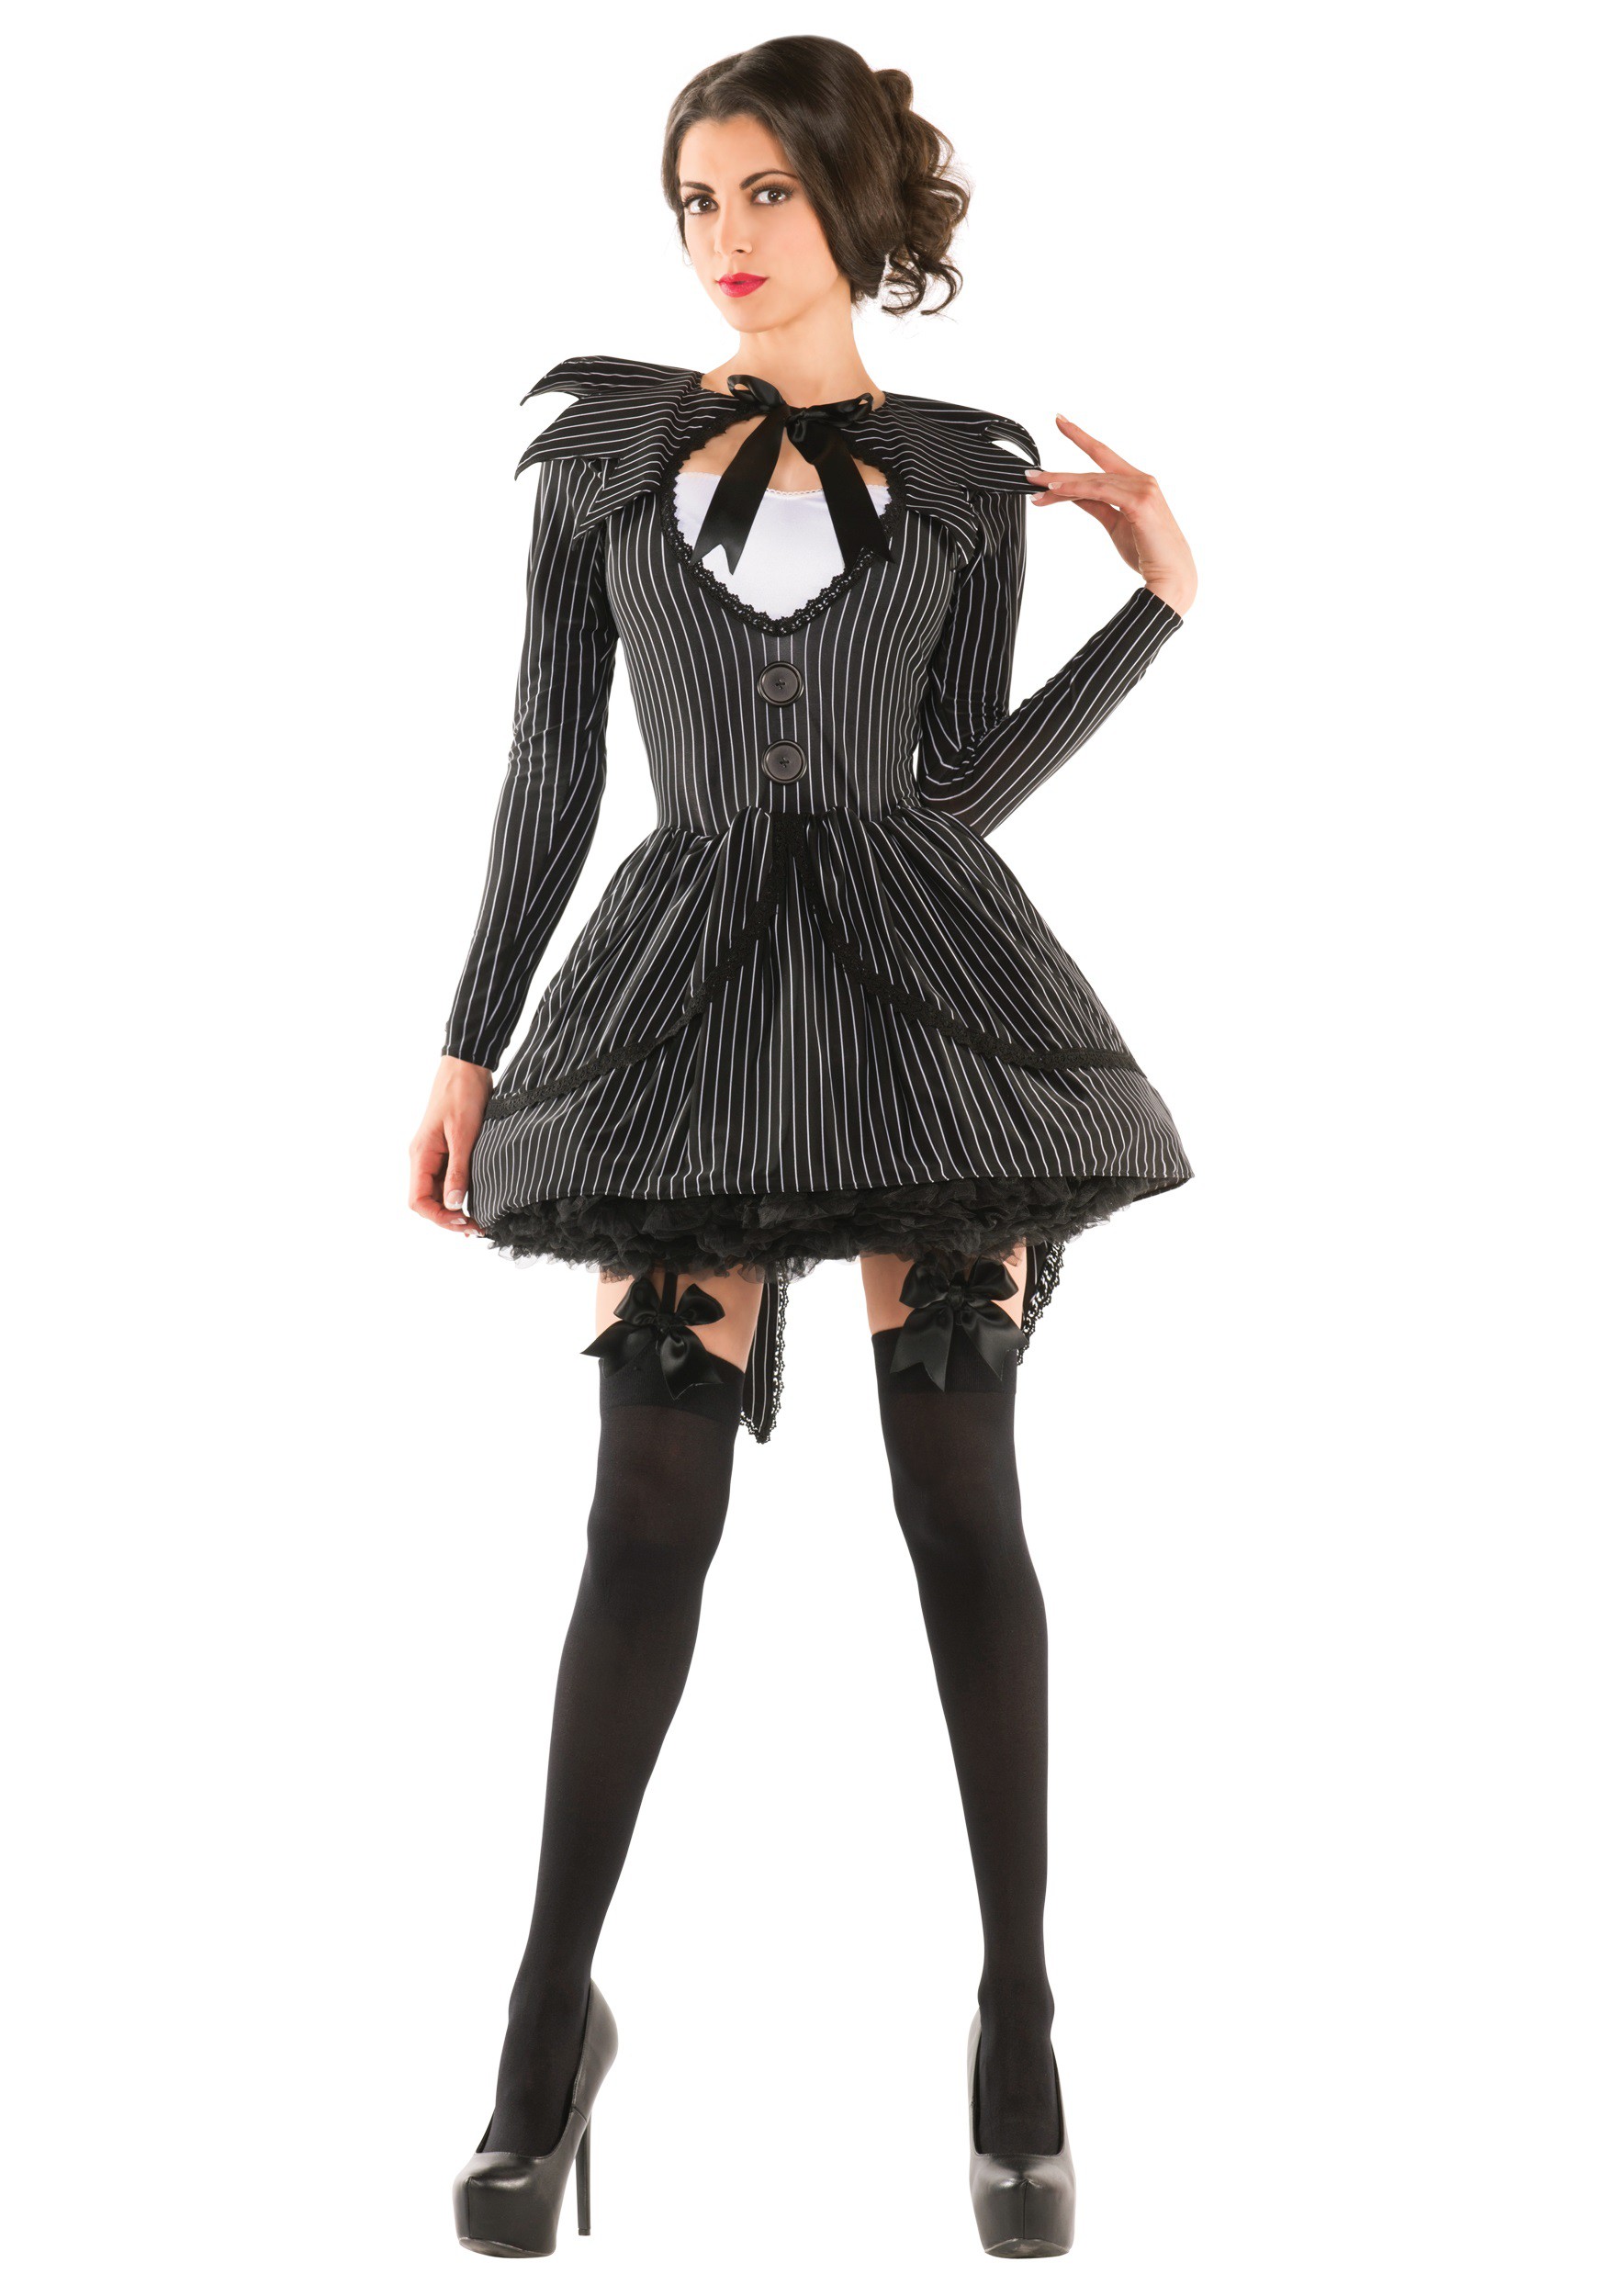 Bad Dreams Babe Adult Costume